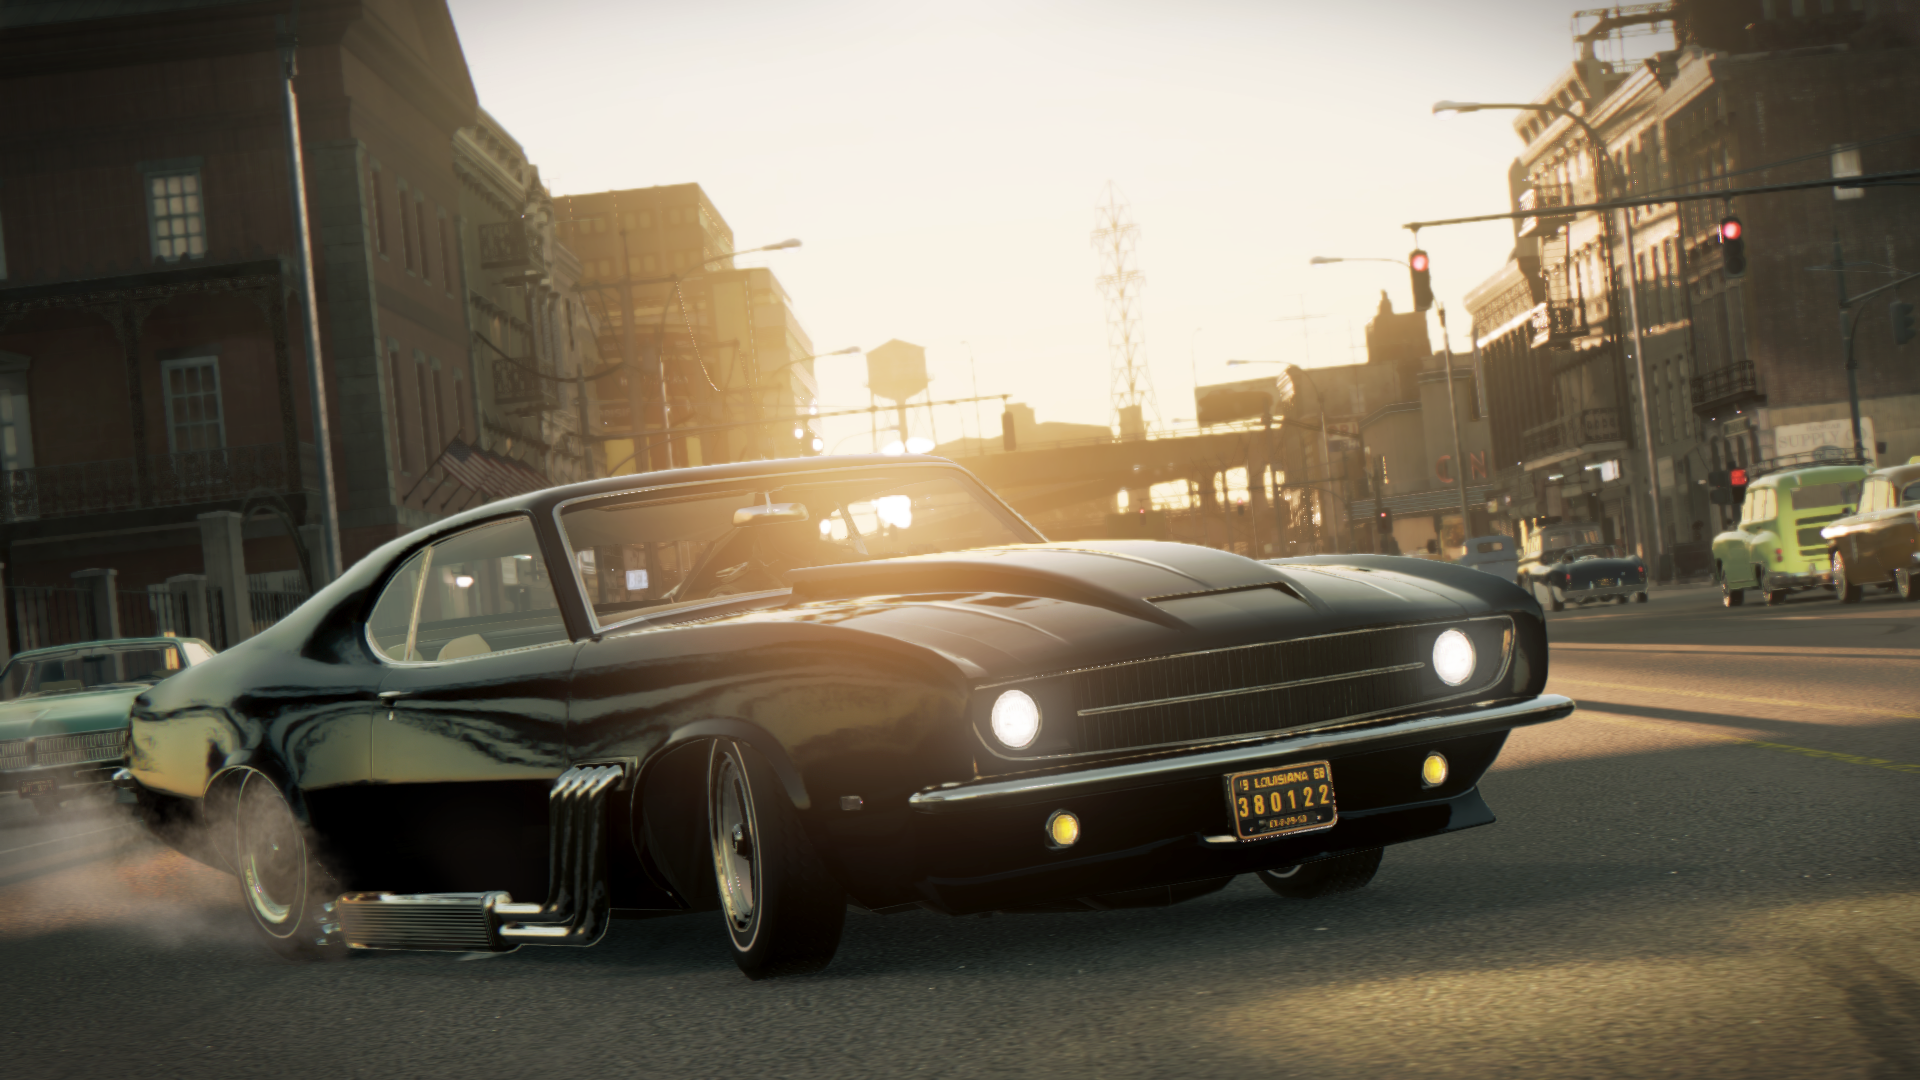 Mafia 3 review: Intelligent storytelling and a sumptuous world,  underserved by inconsistency and repetition